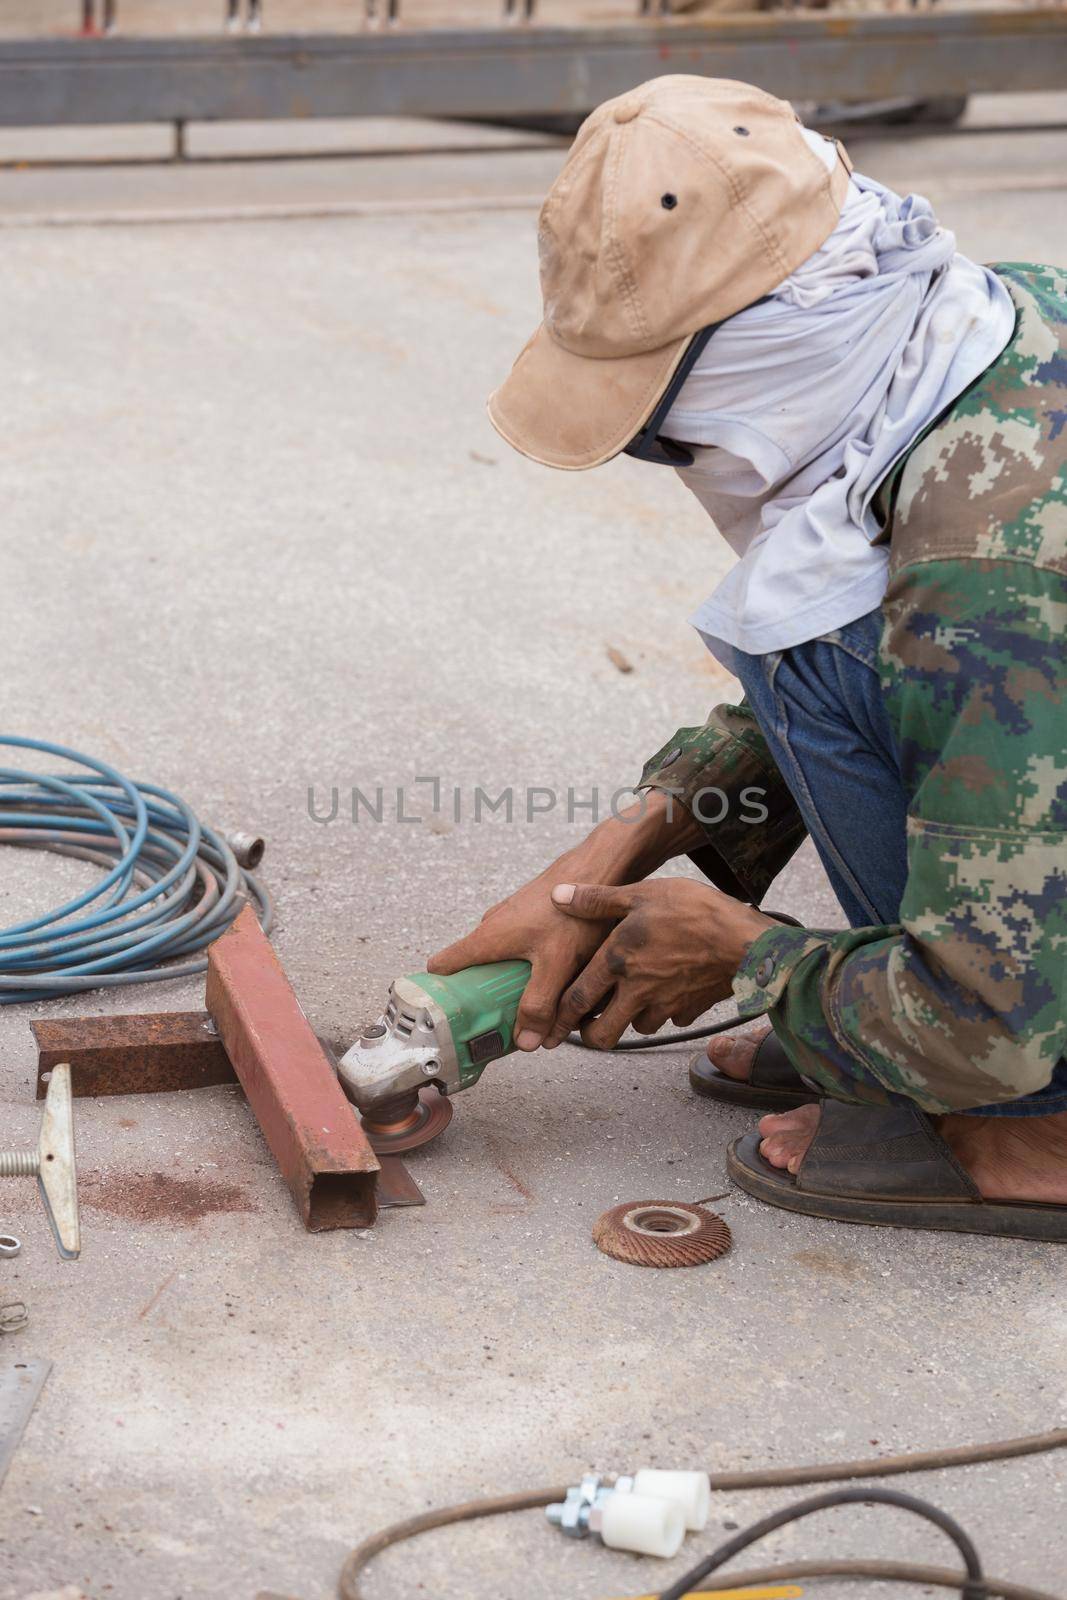 worker using an angle grinder to grinding metal